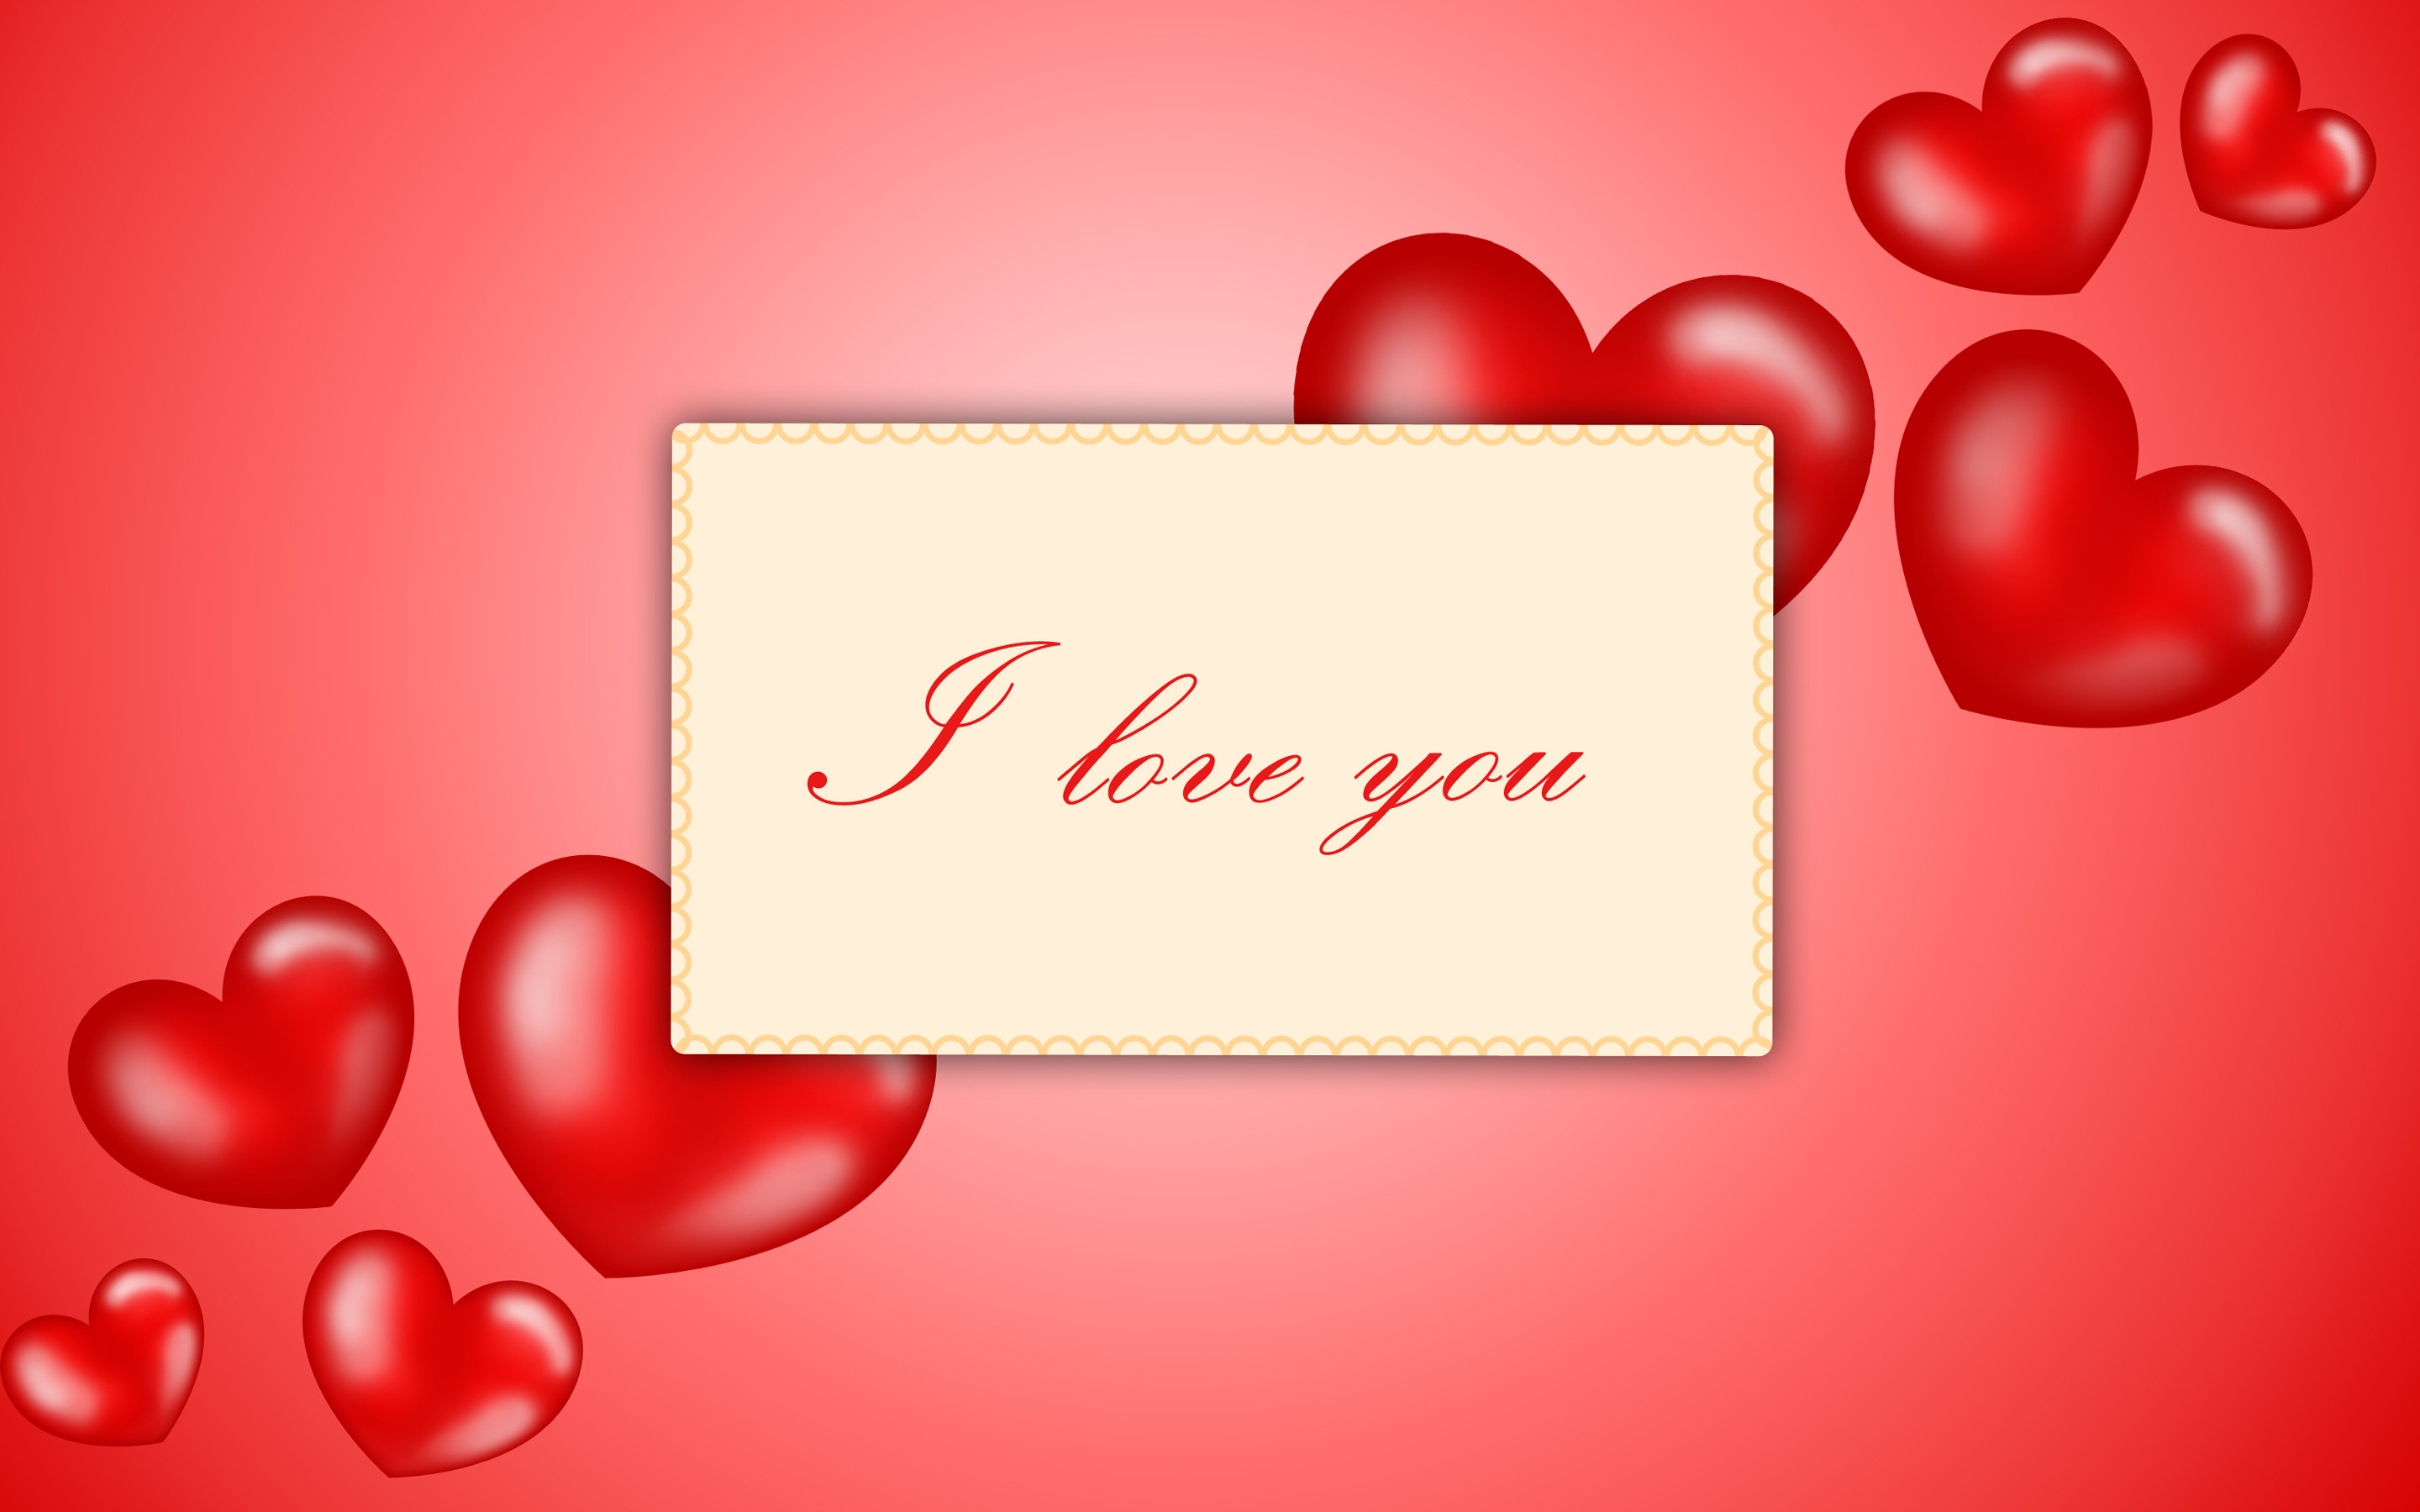 i love you wallpaper high definition 7F5 - WallPey